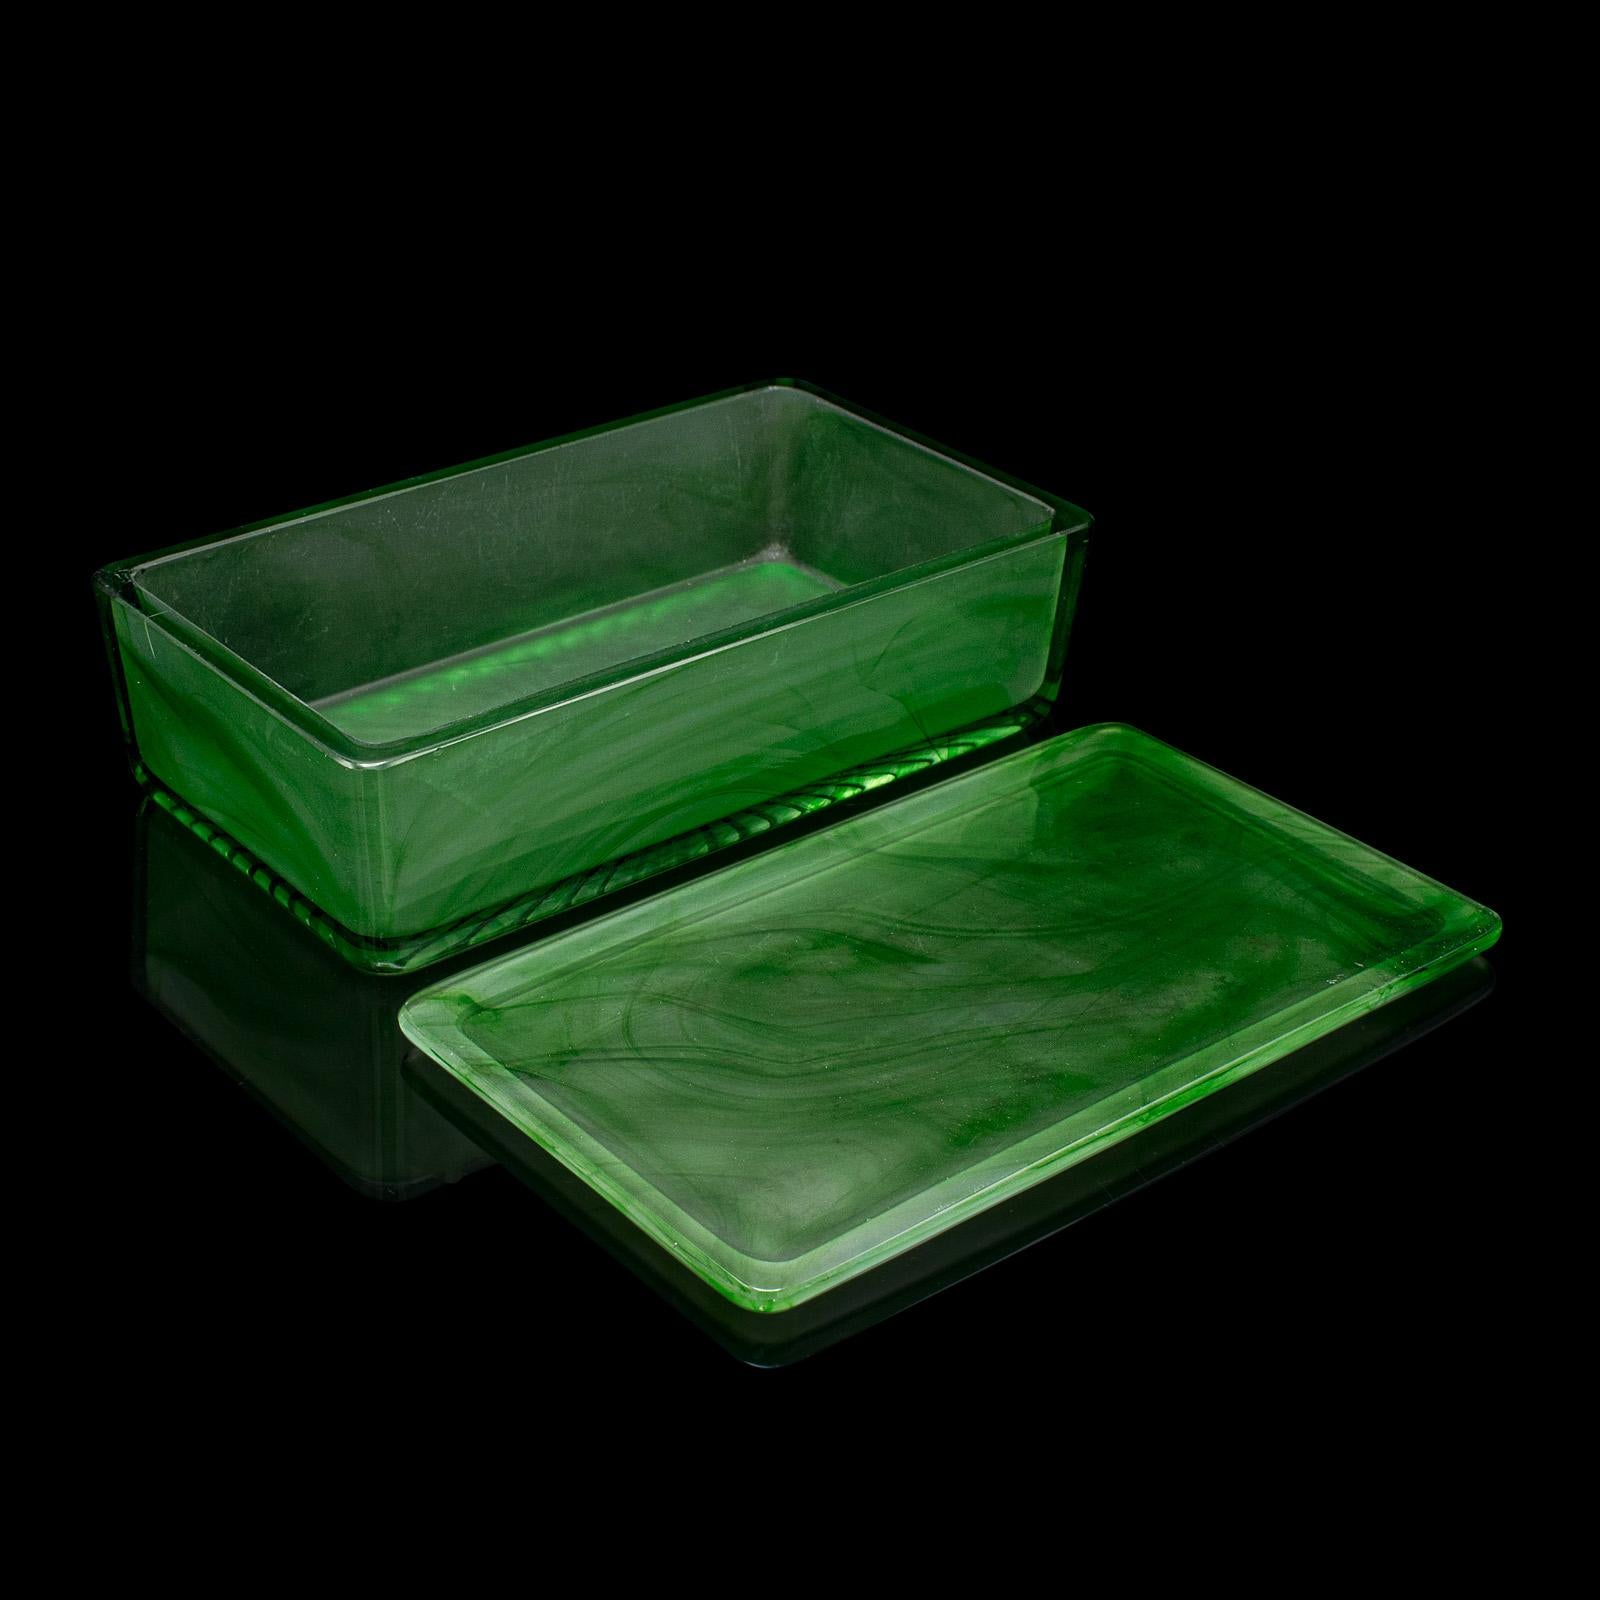 
This is a vintage lidded soap dish. An English, art glass bathroom tray in Art Deco taste, dating to the early 20th century, circa 1930.

Wonderful green glass with an appealing decorative finish
Displays a desirable aged patina and in good